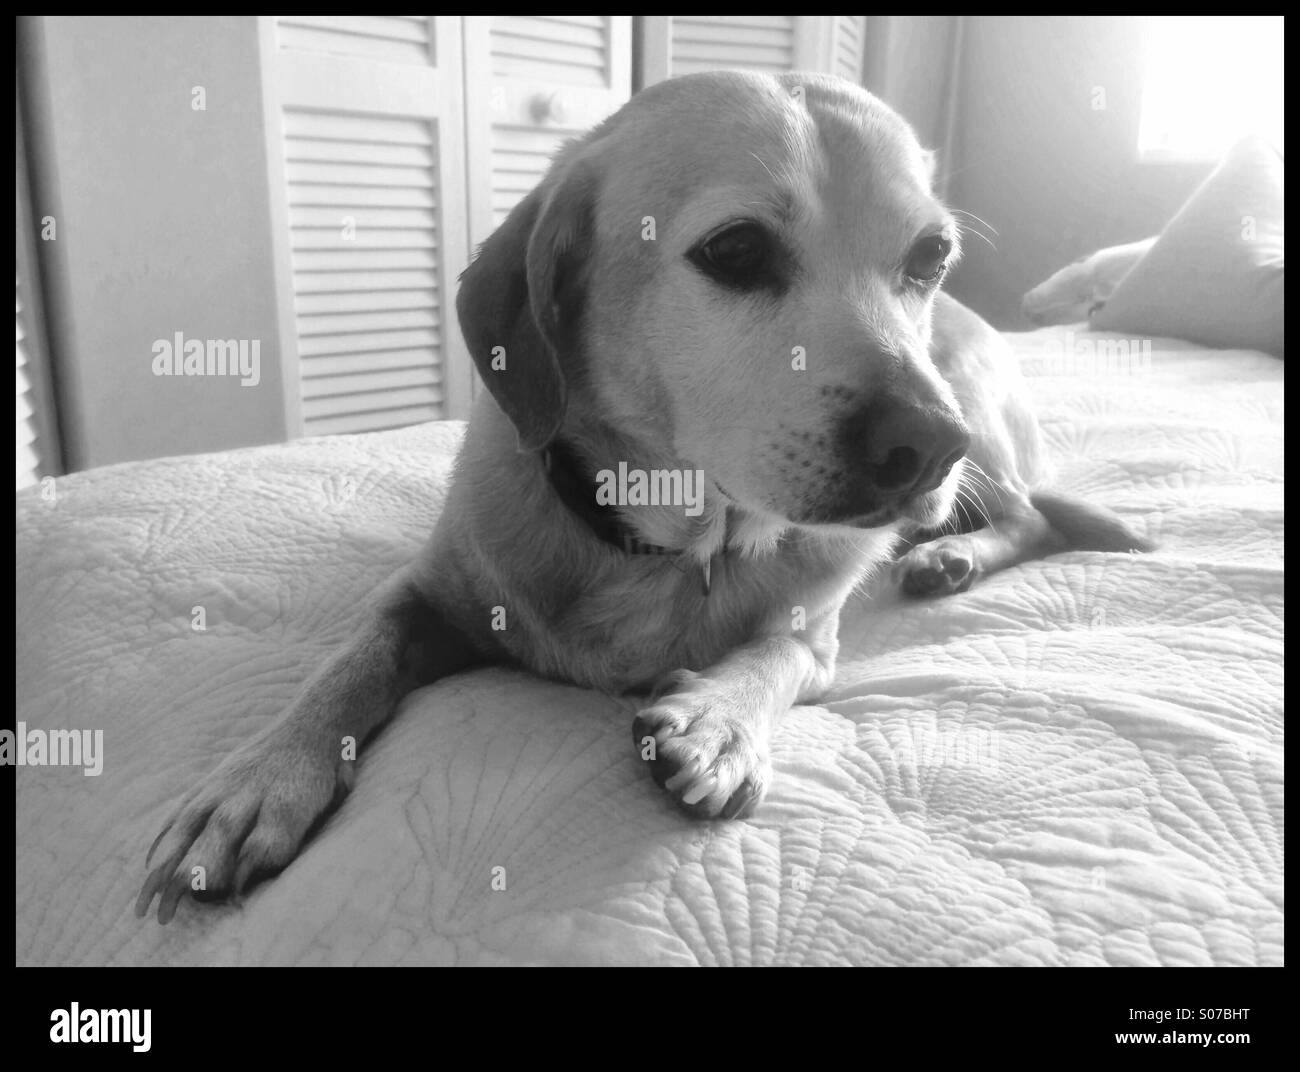 Mixed breed dog on bed. Stock Photo